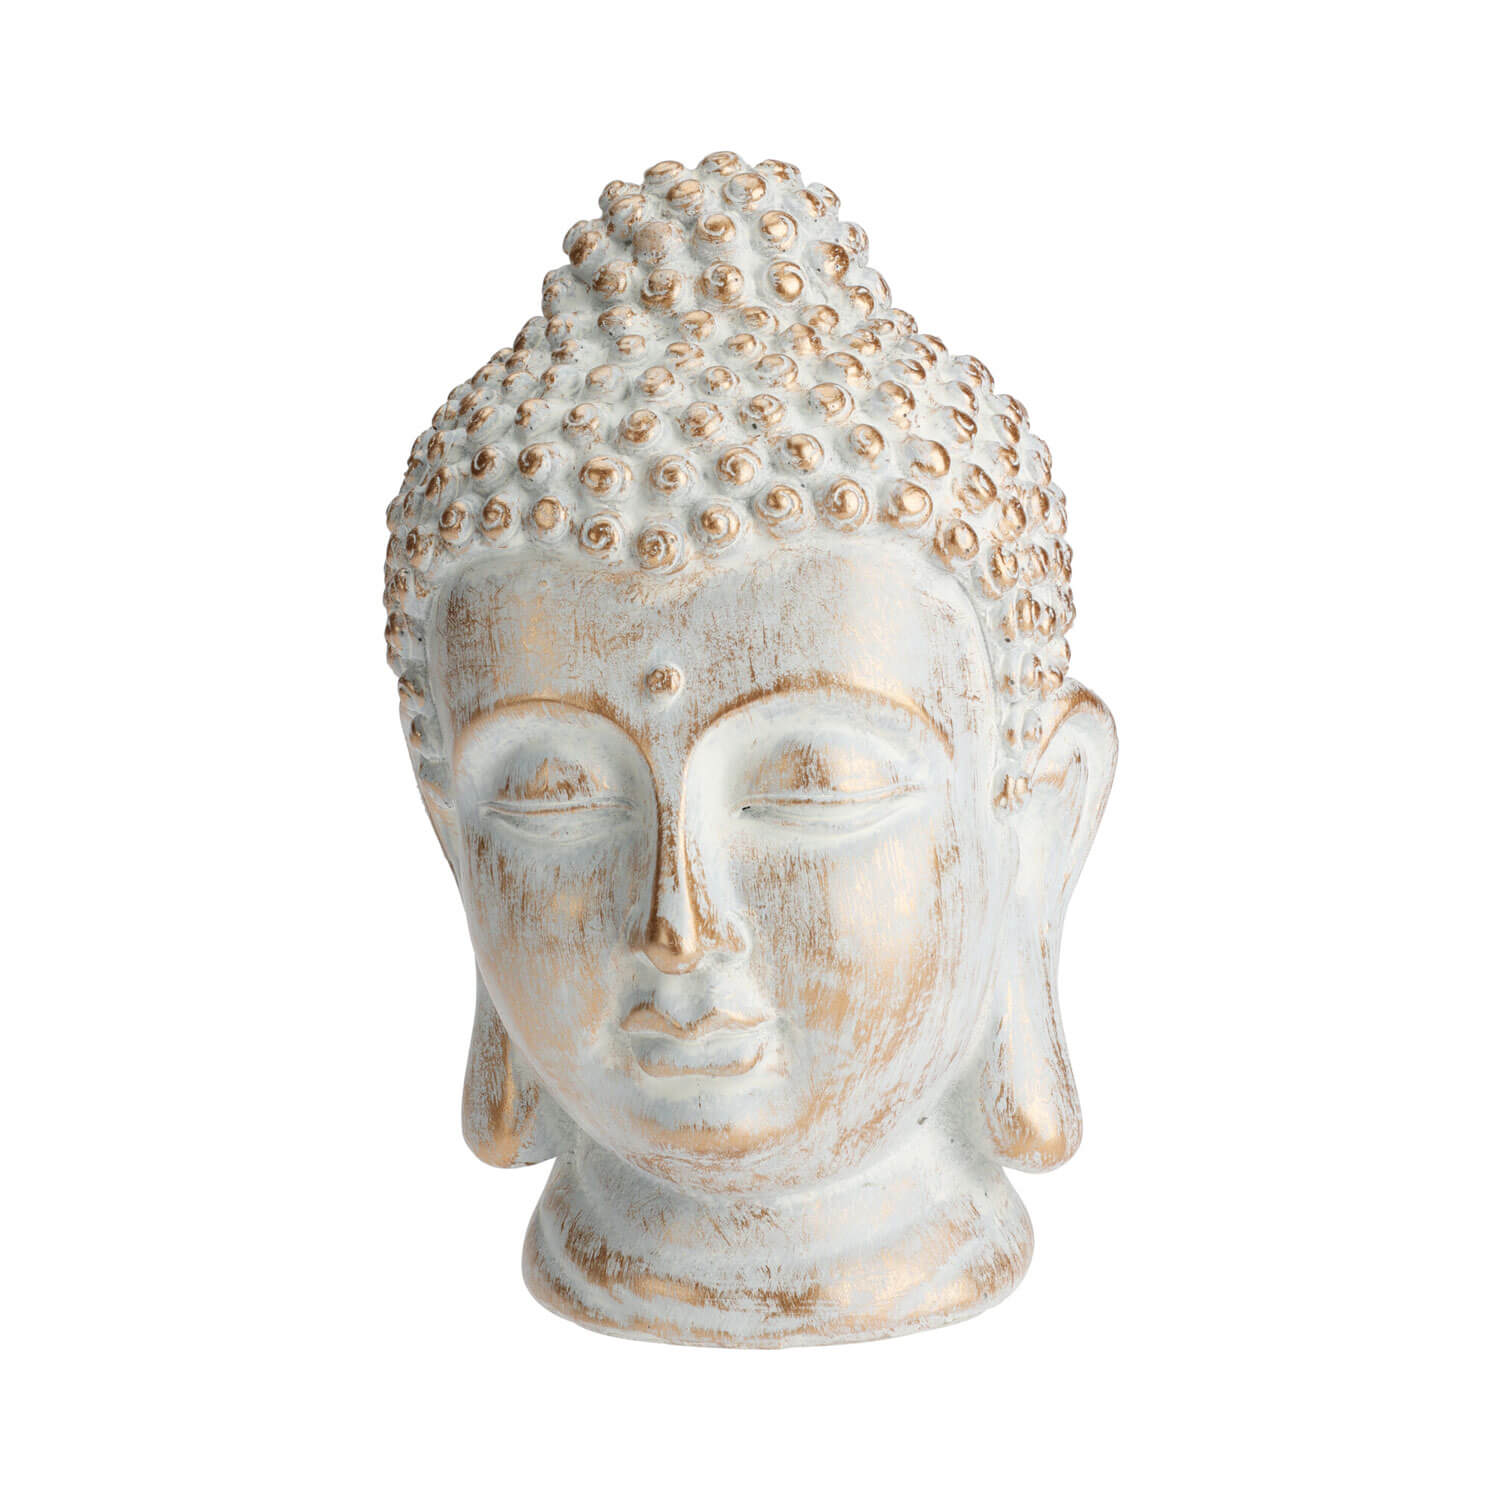 The Home Collection Buddah Head 1 Shaws Department Stores